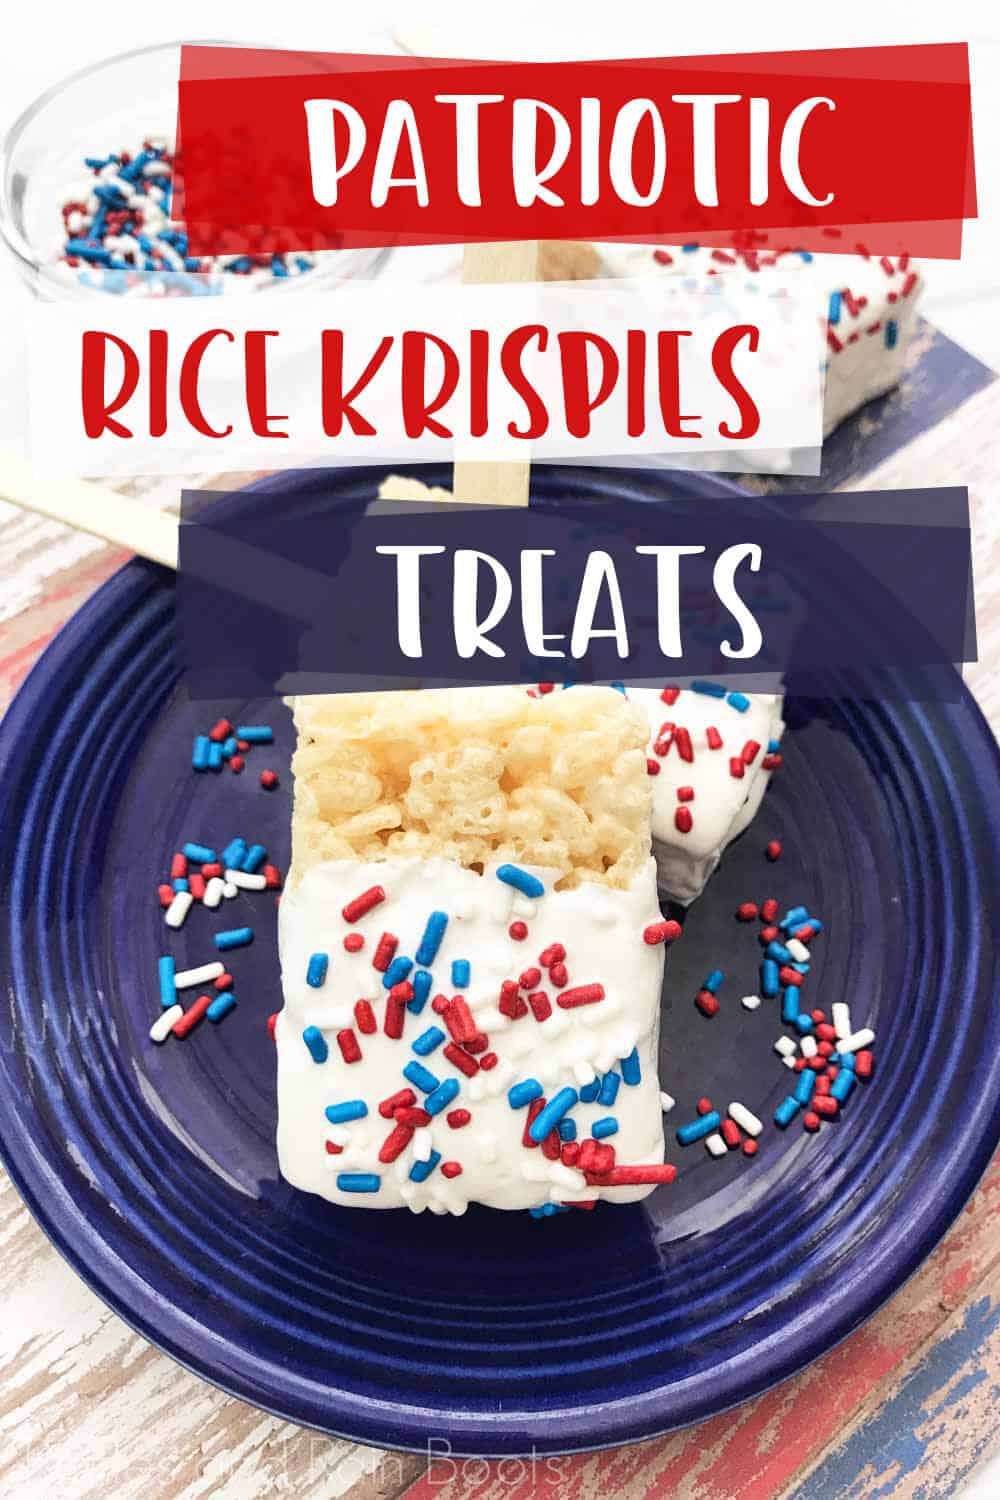 text overlay which reads patriotic rice krispies treats over image of red white and blue rice krispies treats on a blue plate on a multicolored wood table